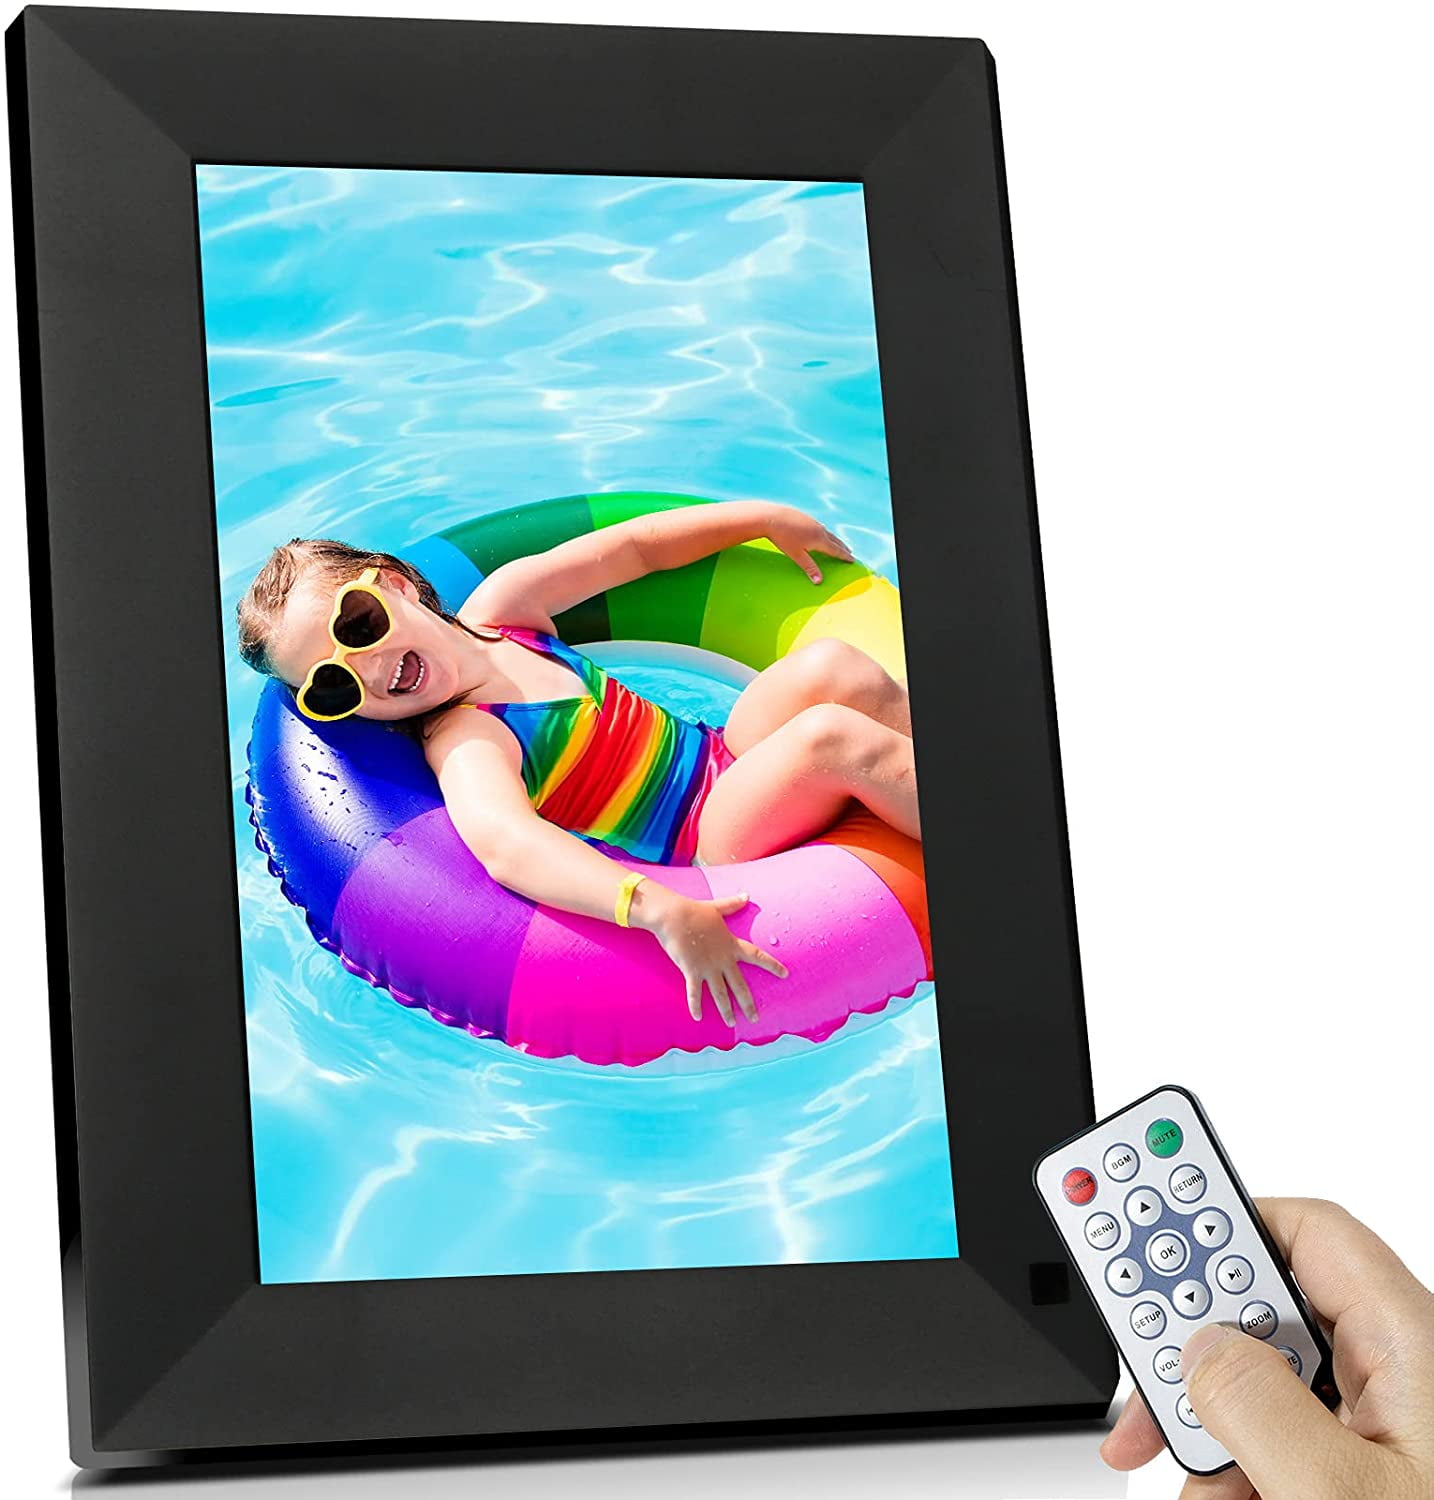 8-inch Widescreen Digital Photo Frame White USB Port and SD Card Slot and Remote Control with 1024 X 768 IPS Display